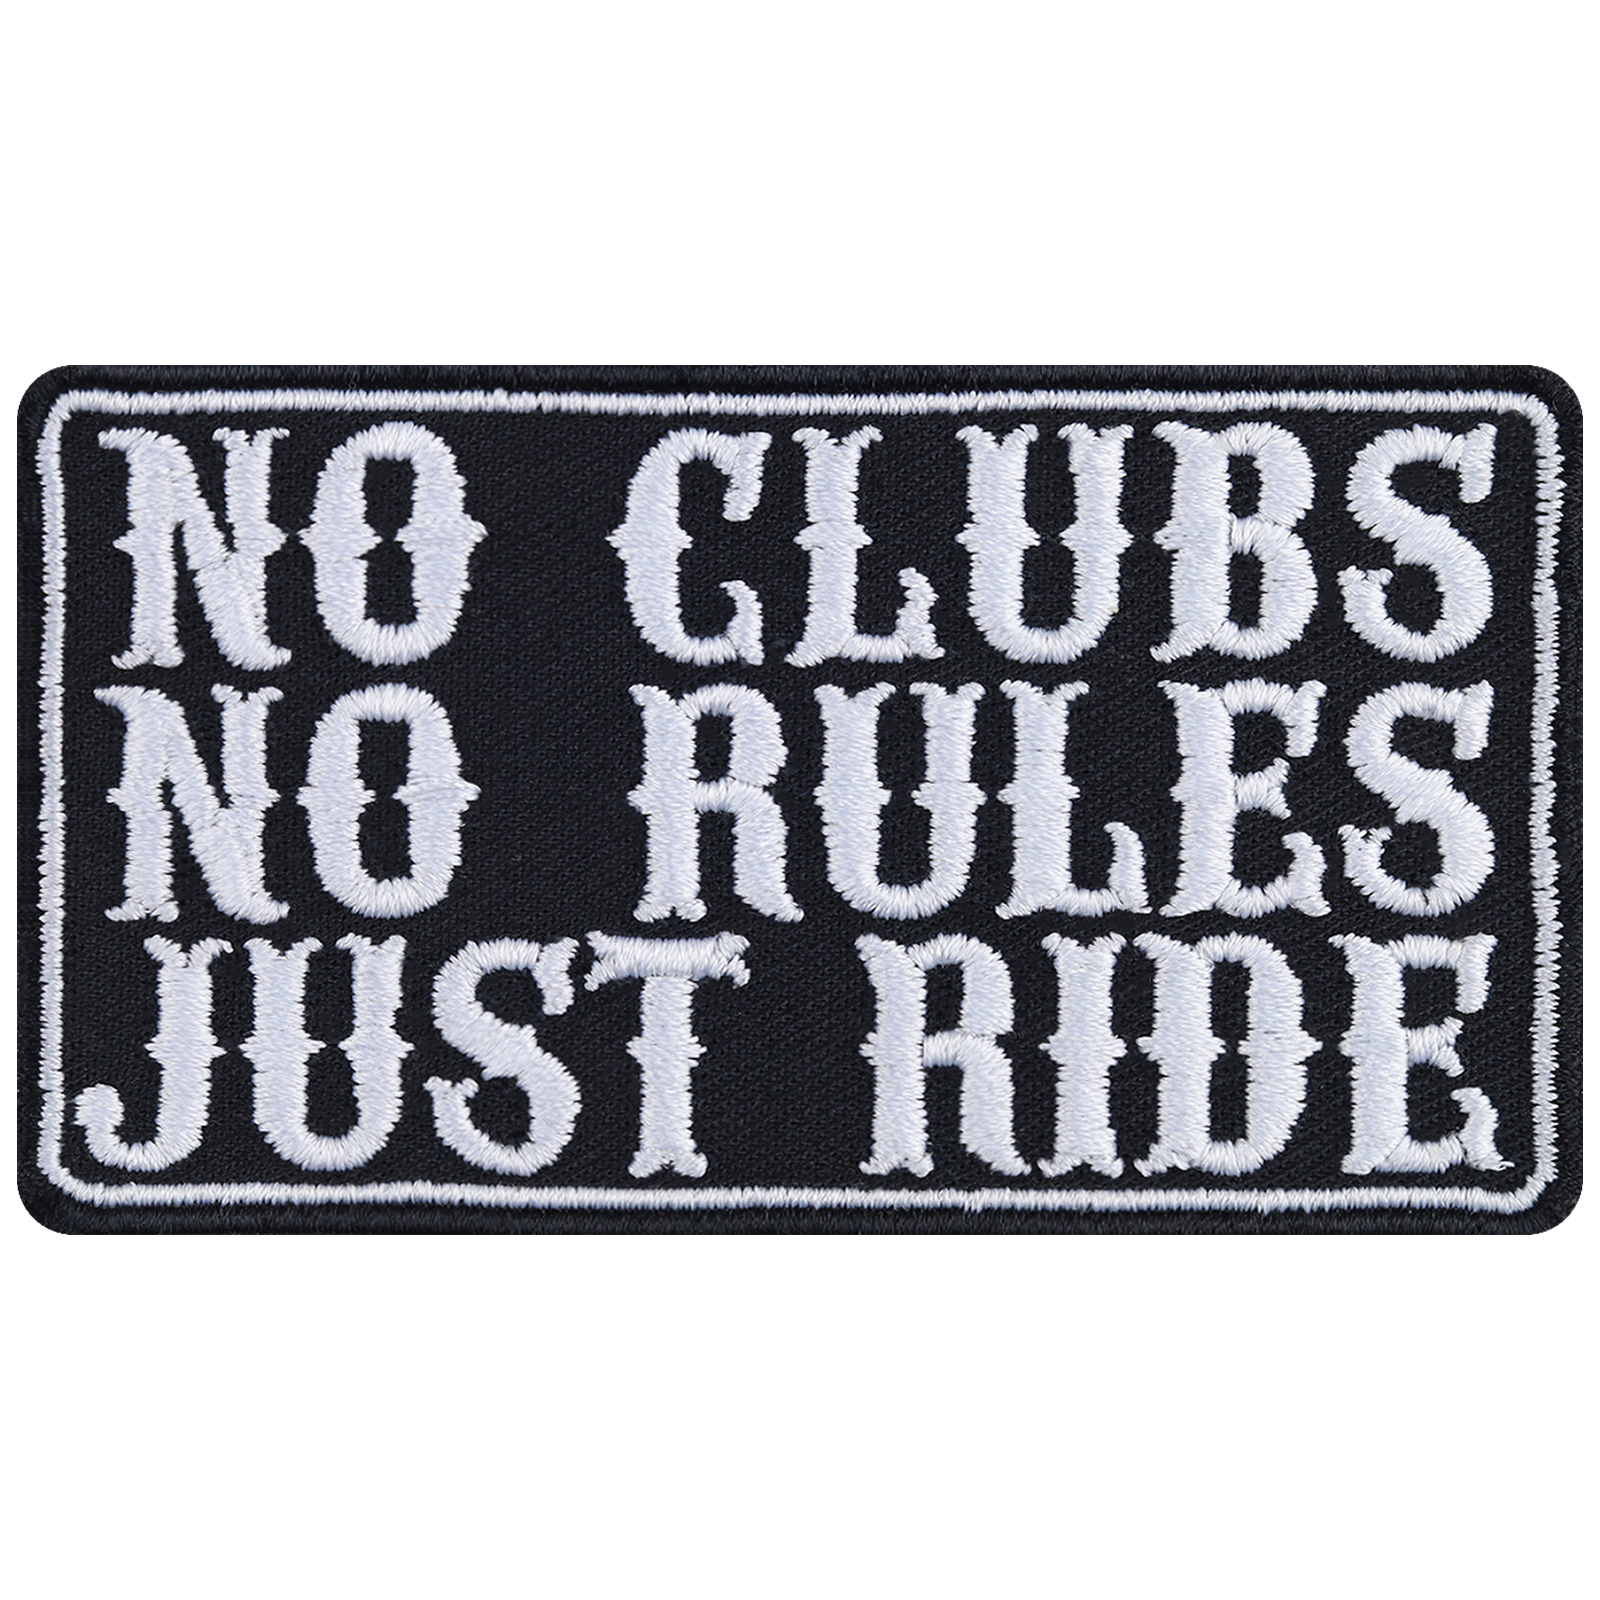 No clubs, no rules, just ride - Patch